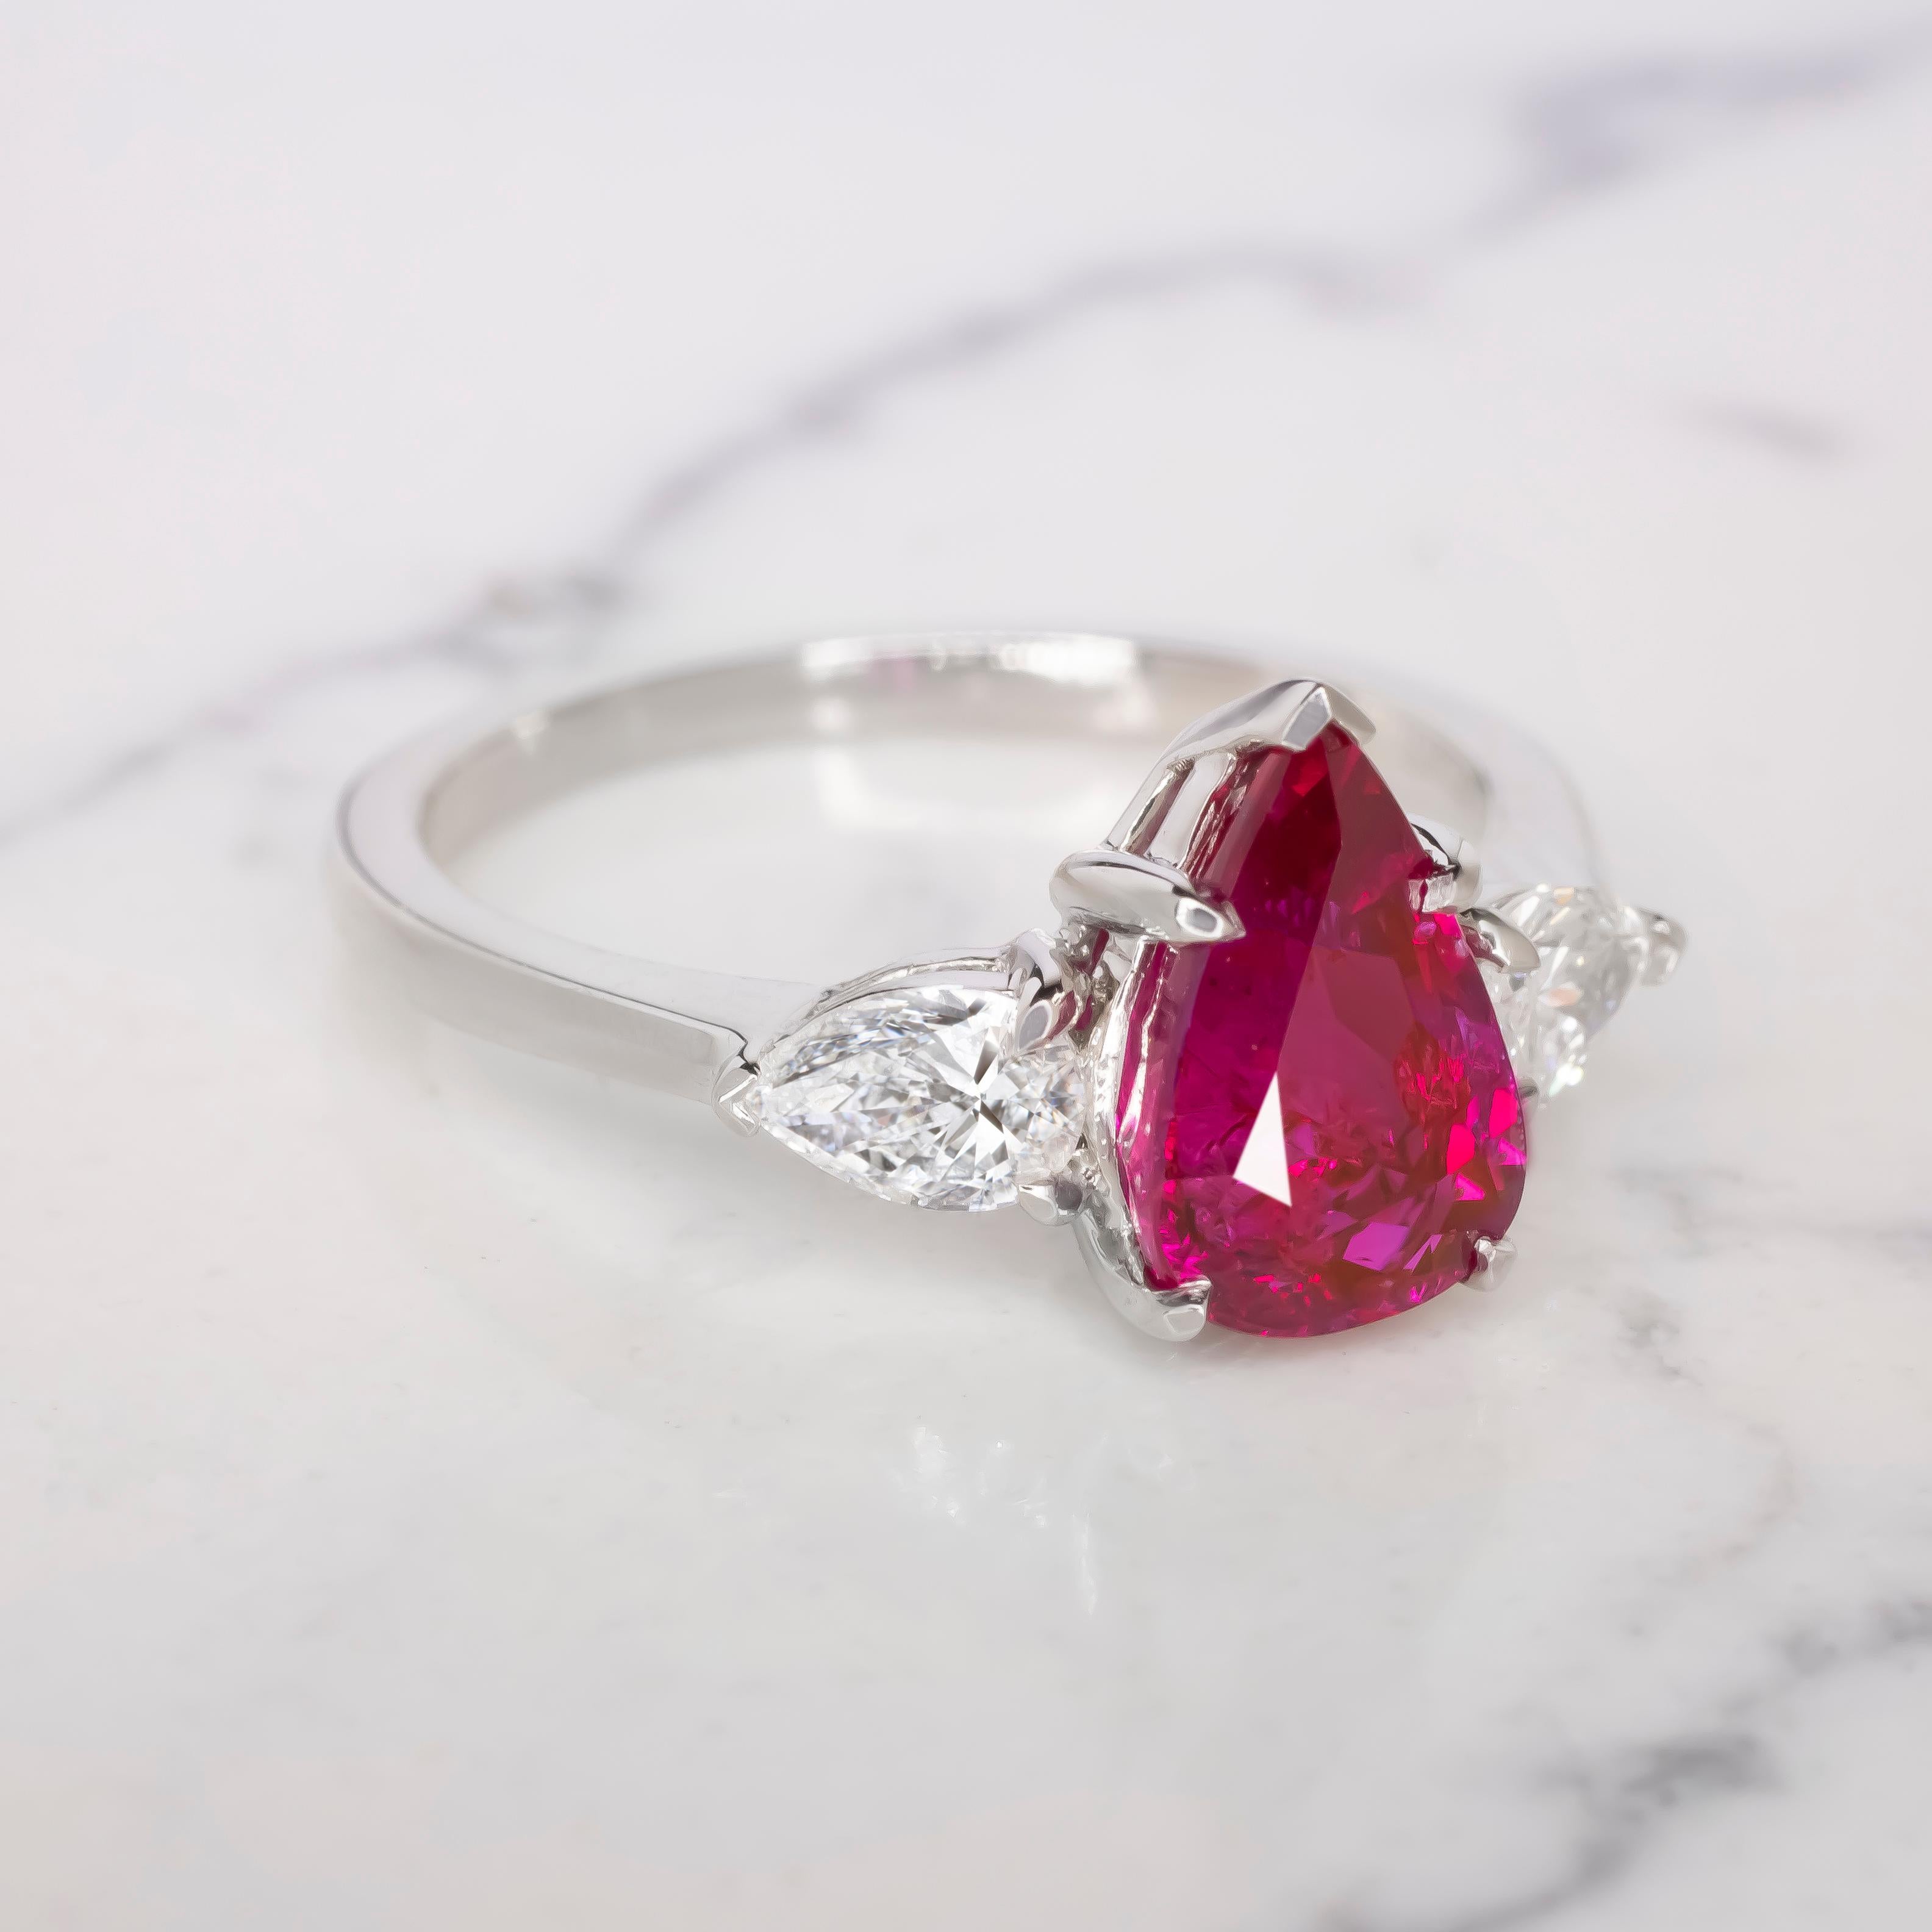 Antinori Di Sanpietro GRS-Certified Pear Cut Ruby and Diamond Ring in 18K White Gold

Embrace the splendor of Antinori Di Sanpietro's craftsmanship with this exquisite three-stone ruby ring, a testament to timeless elegance and luxury. This